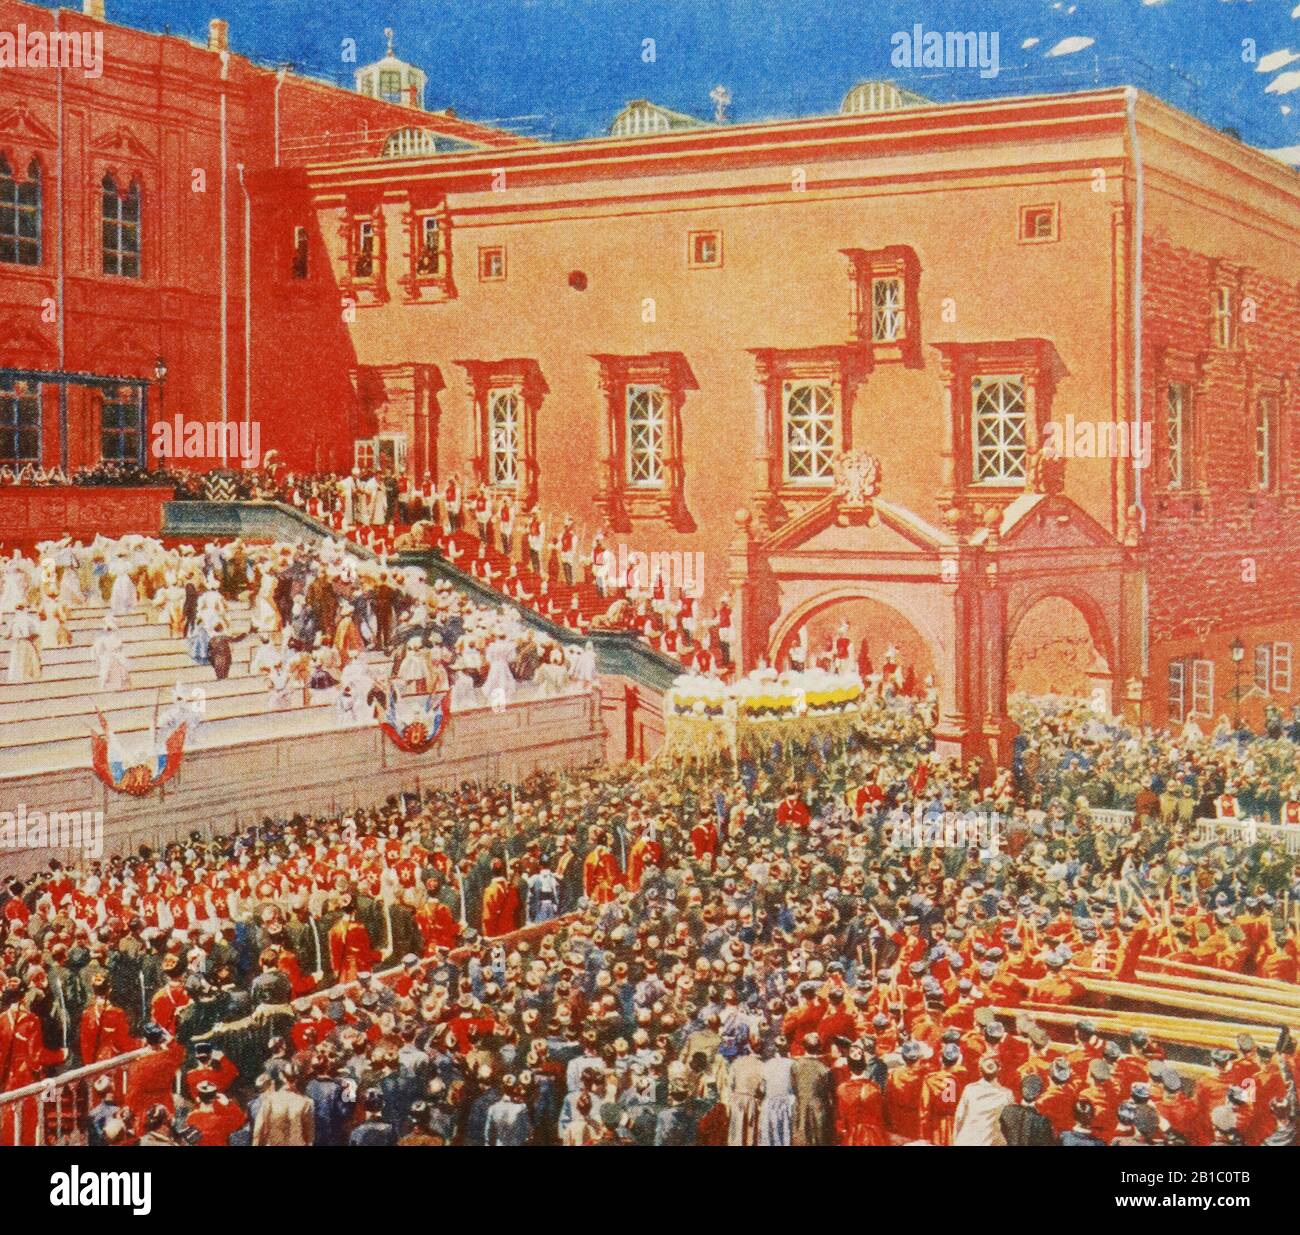 The procession from the Red Porch on the day of the coronation of the Russian Emperor Nicholas II Alexandrovich on May 14, 1896. Painting by A. Ryabushkin, 19th century Stock Photo